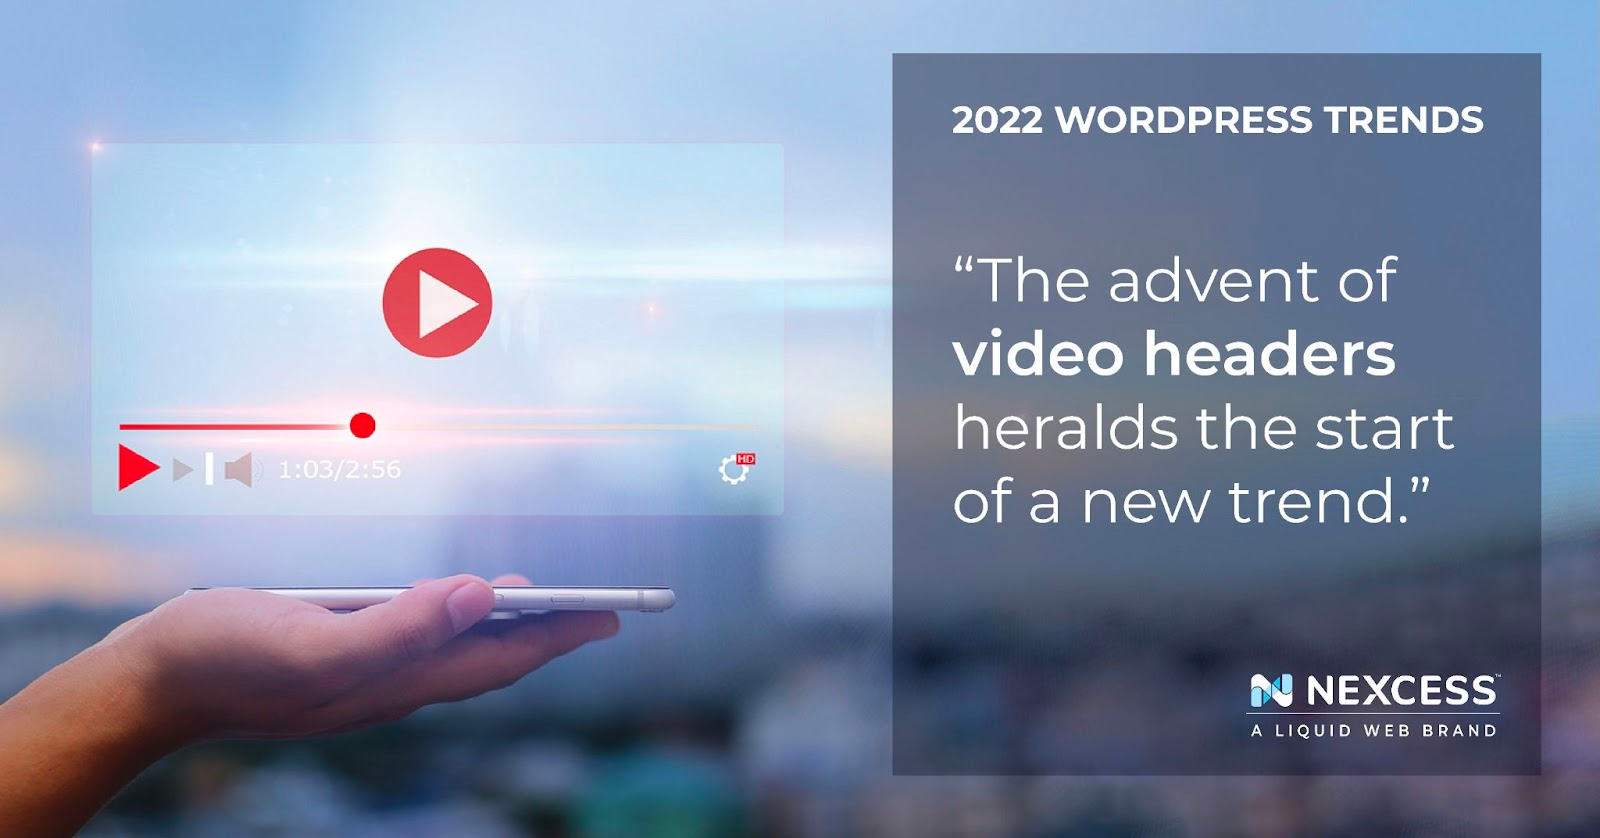 Video headers are another emerging WordPress trend